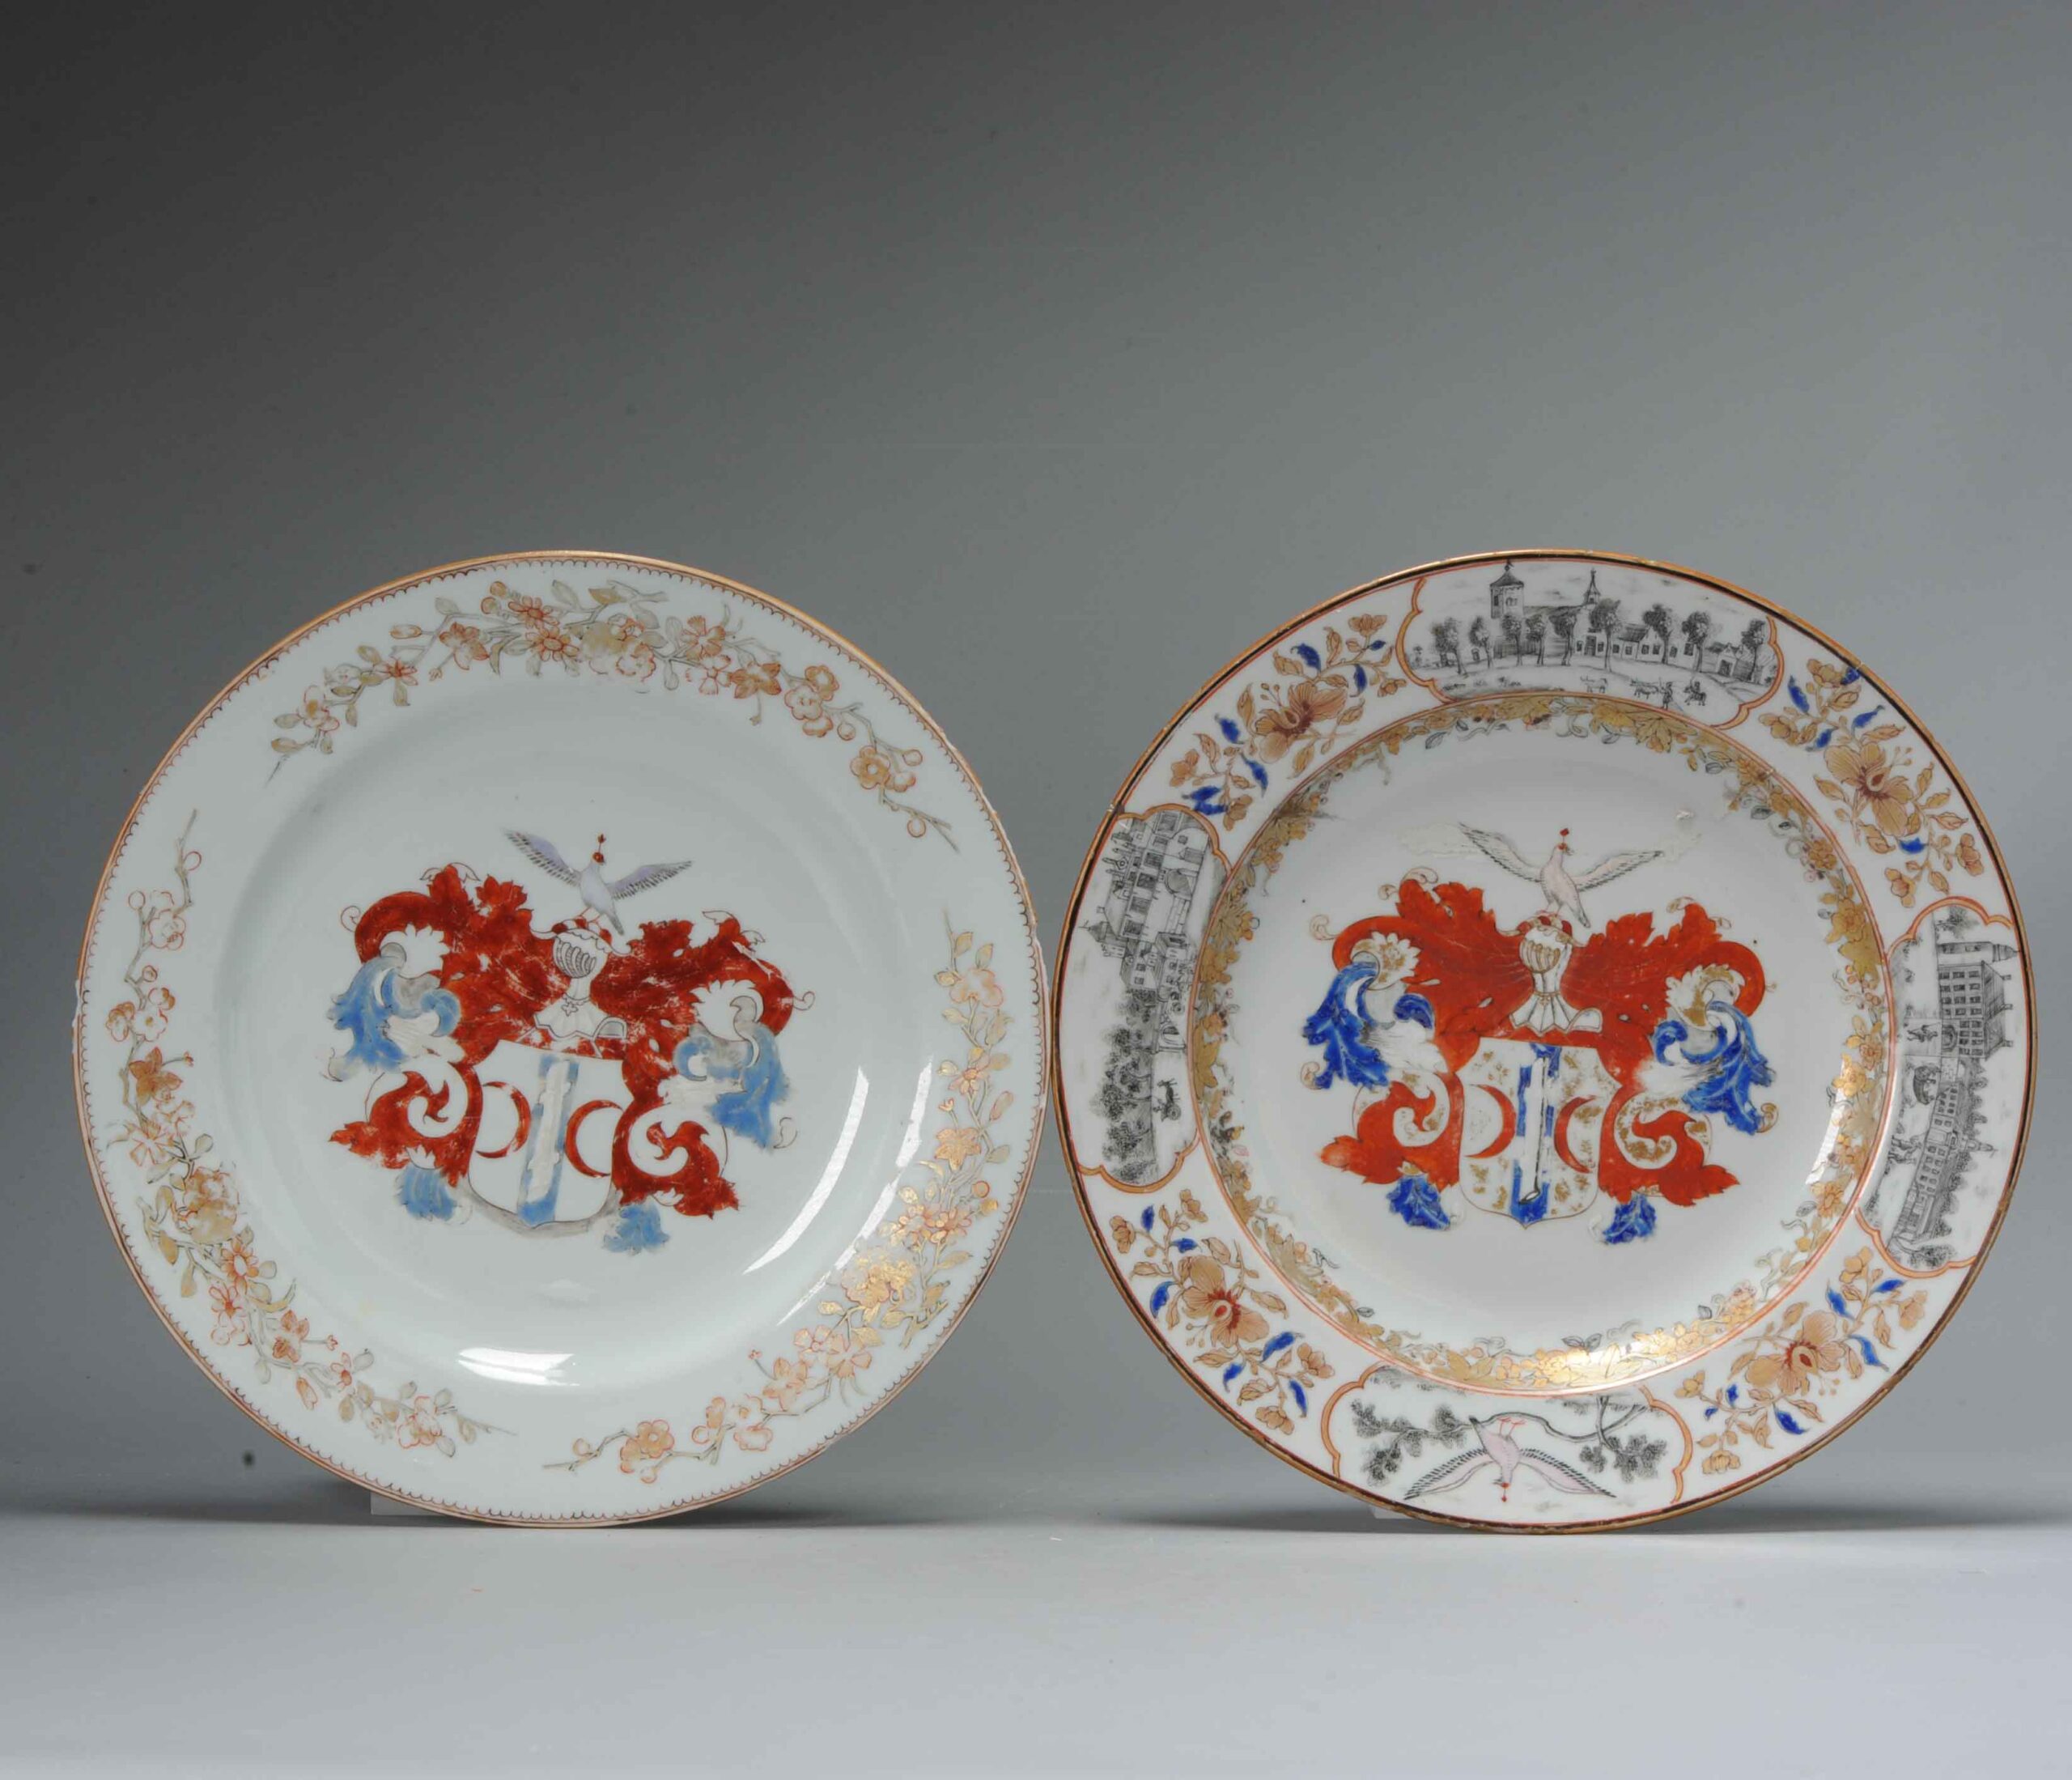 Pair of Very Rare Antique Chinese Porcelain Charger Arms of ADRIAAN VALCKENIER, Qianlong